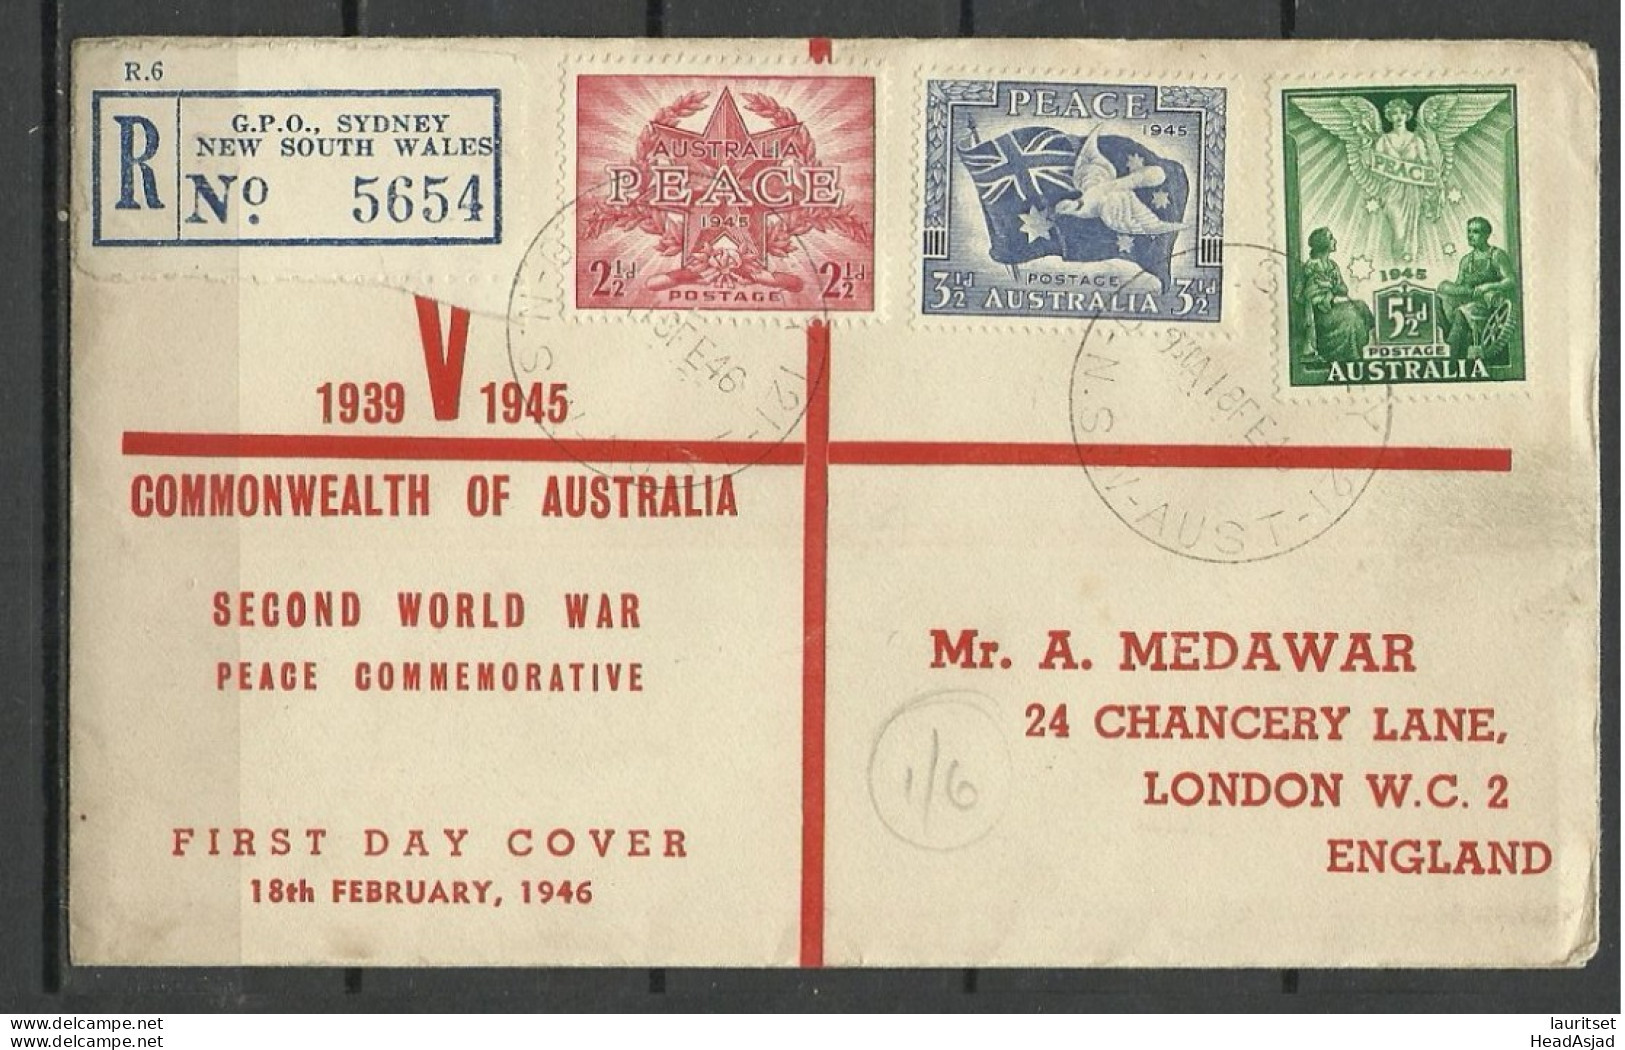 AUSTRALIA 1946 Michel 173 - 175 FDC WWII Peace Registered Sydney NSW, Sent To Great Britain - Premiers Jours (FDC)